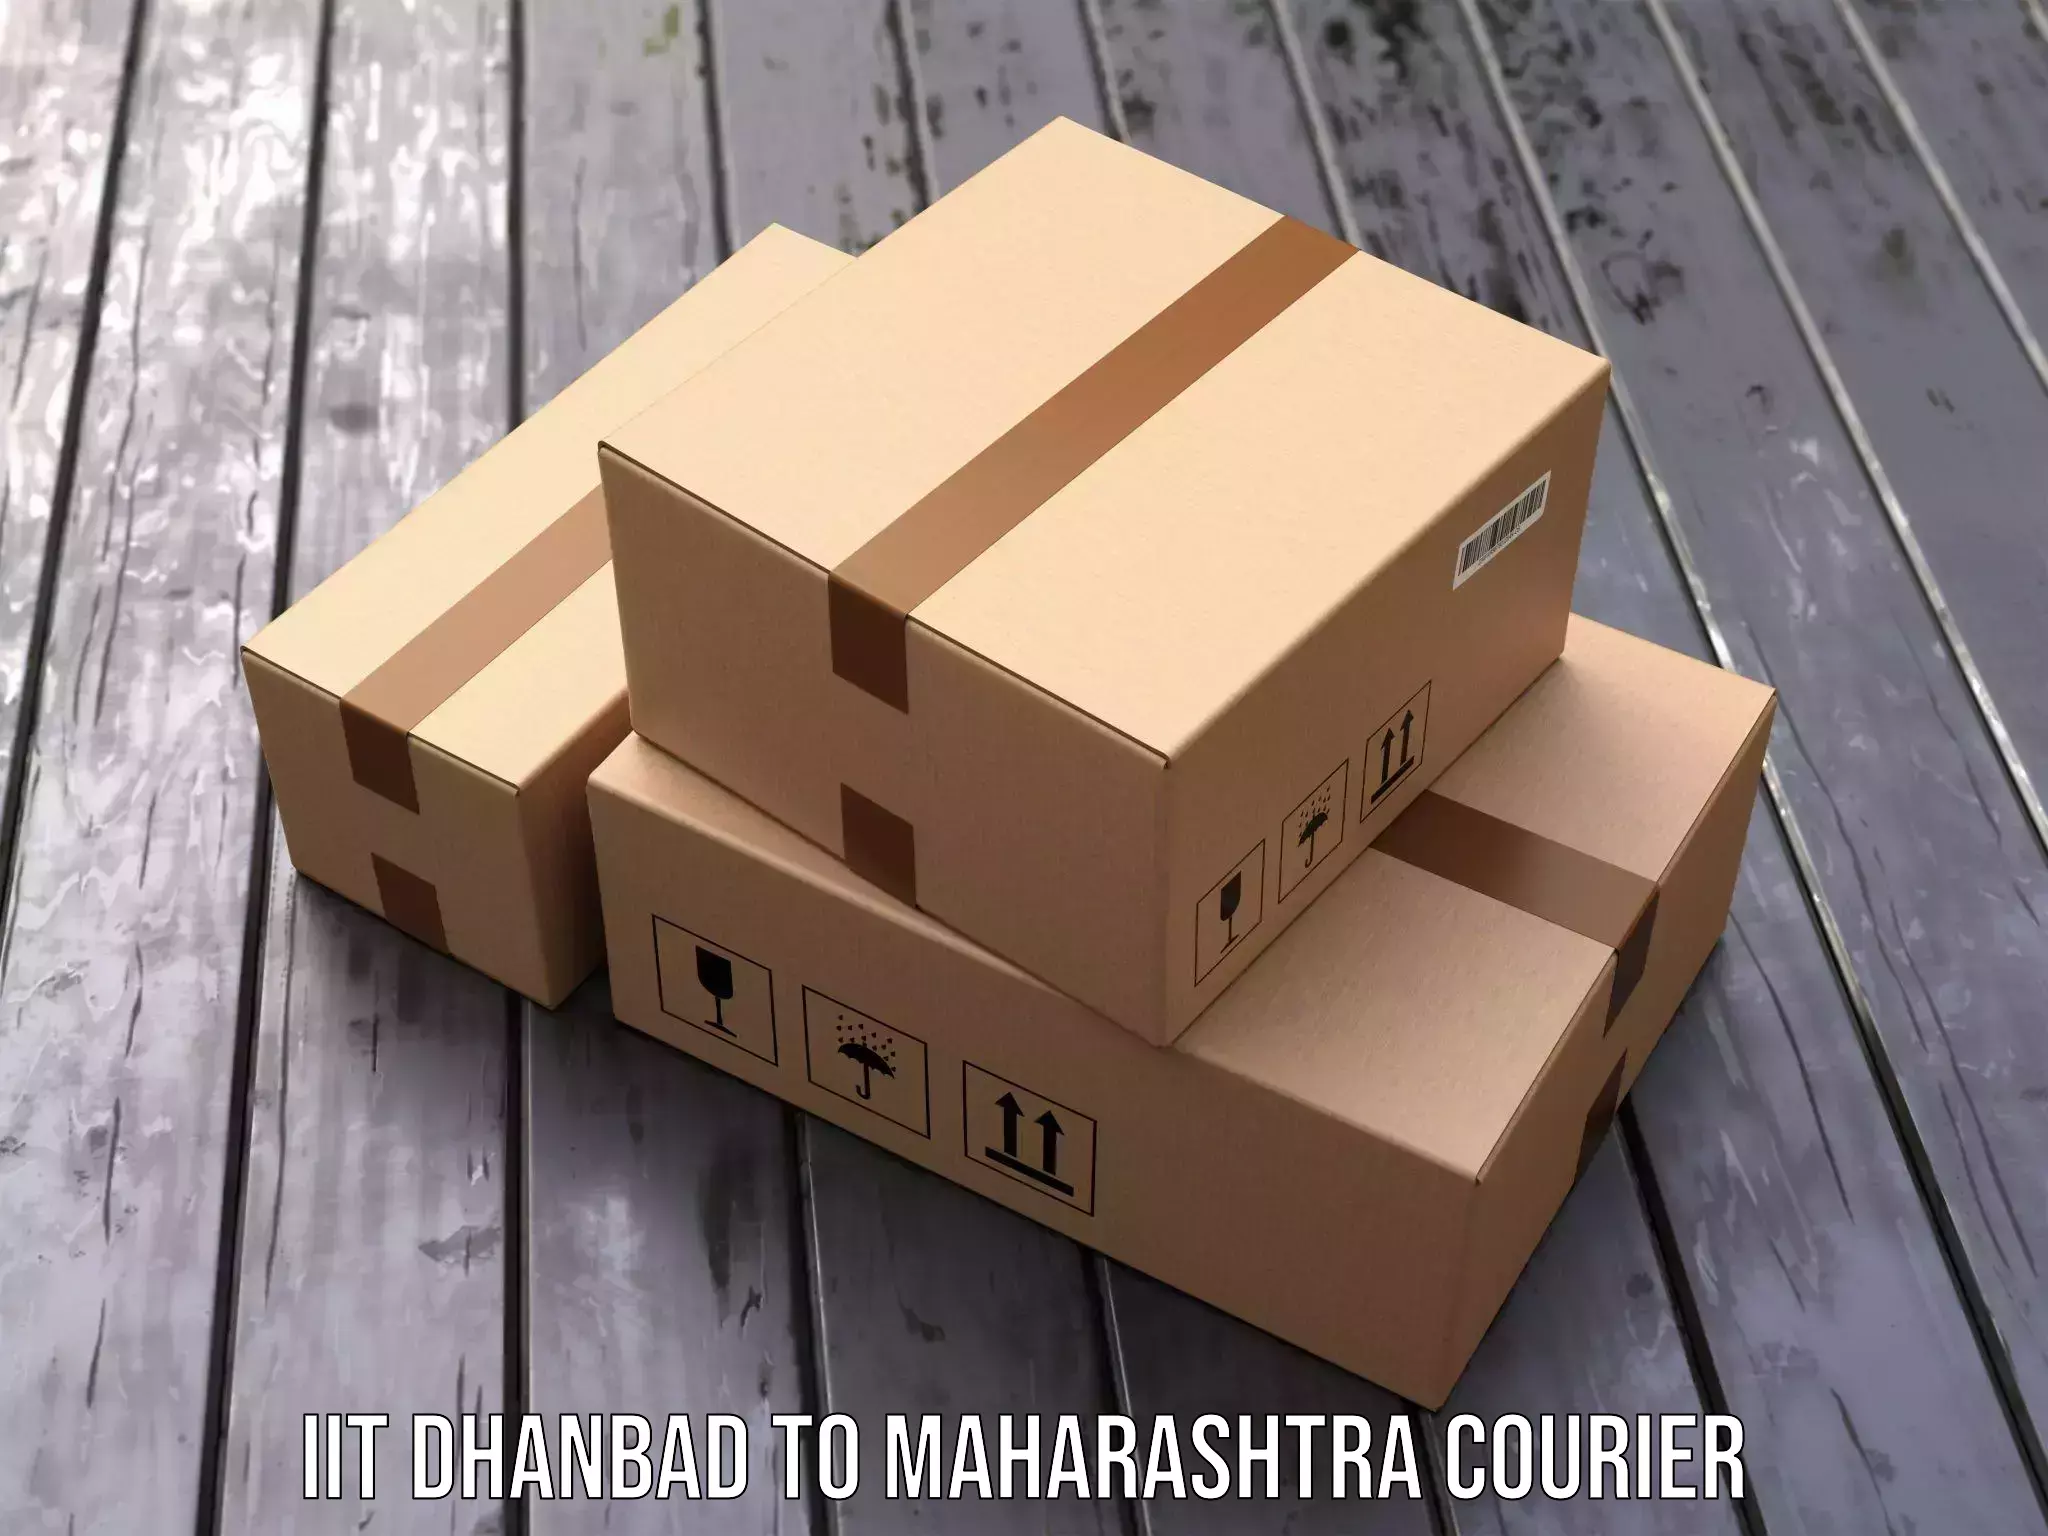 Courier service comparison IIT Dhanbad to Dhamangaon